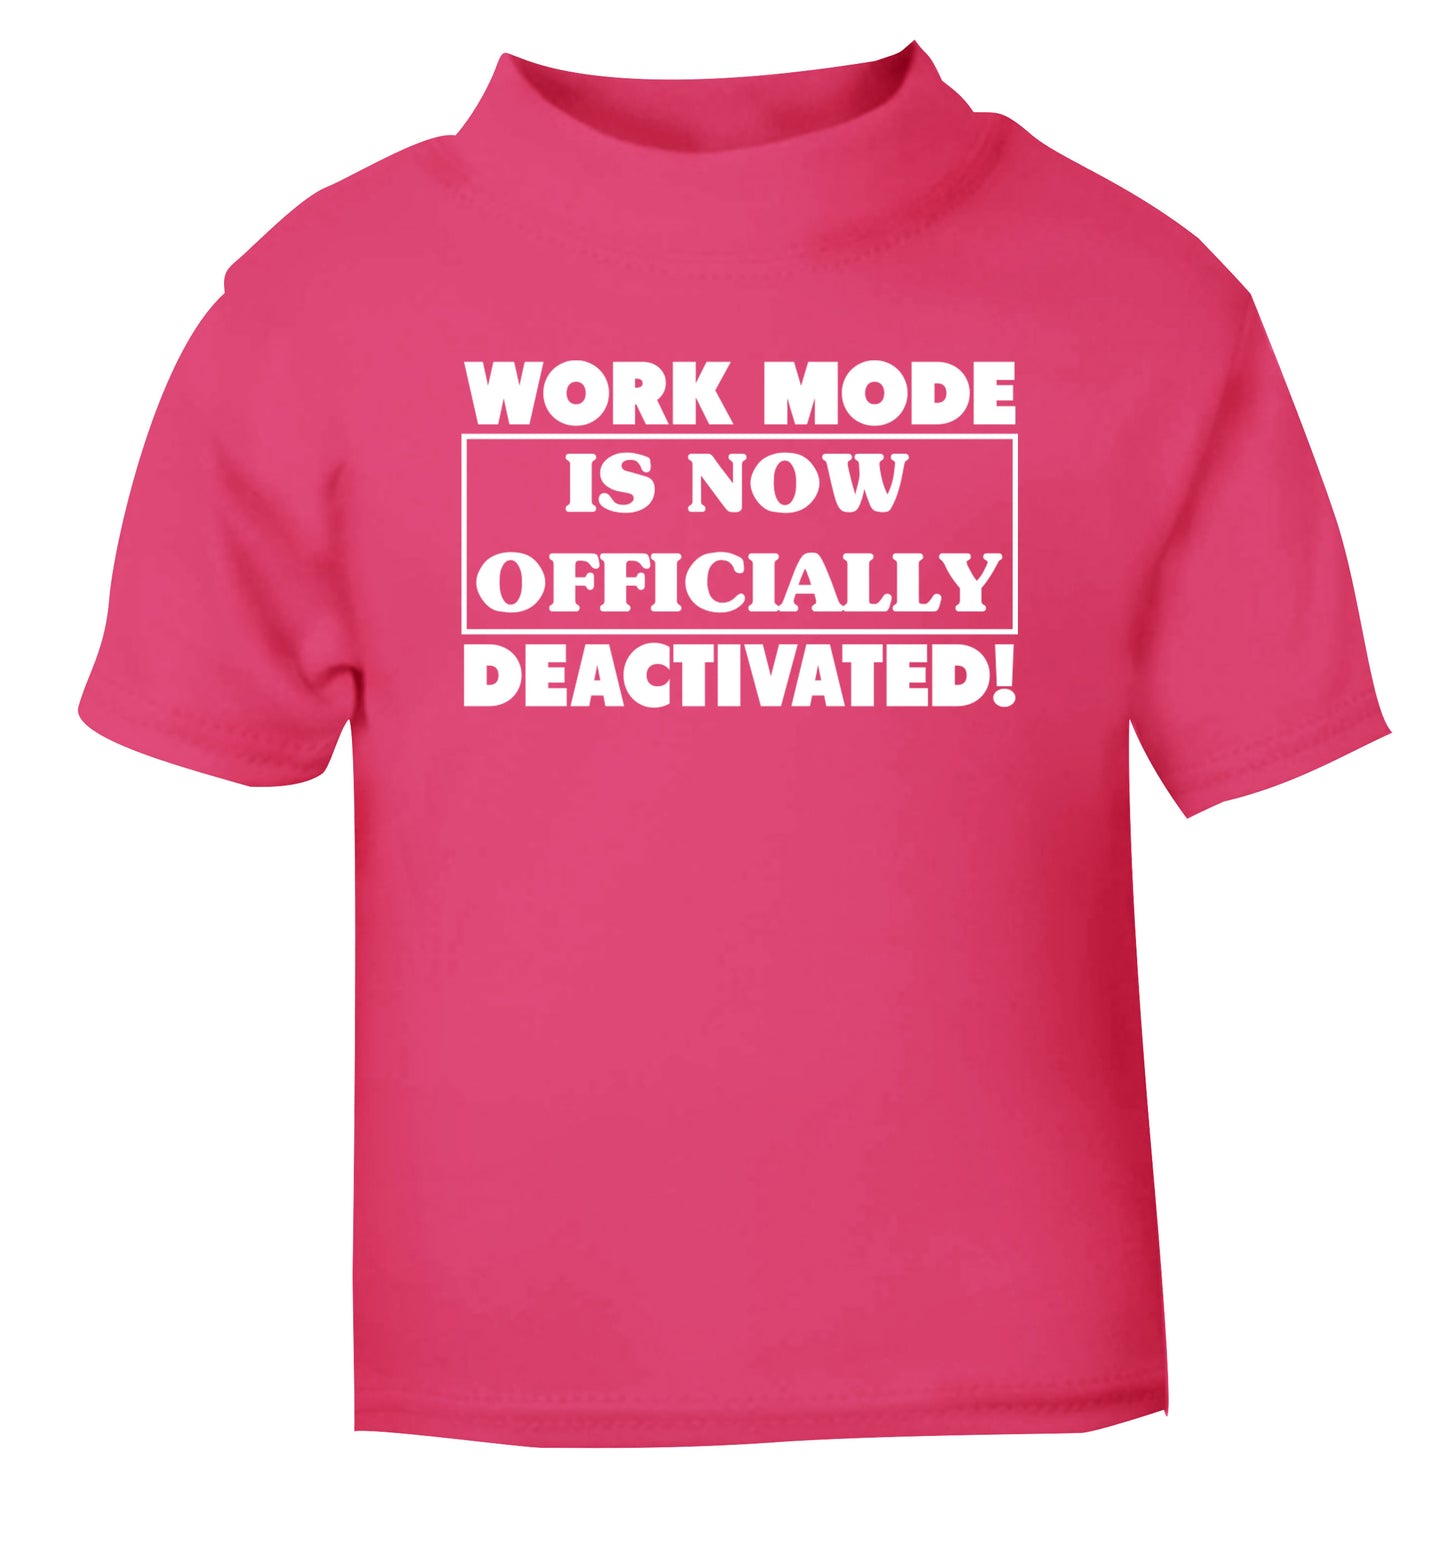 Work mode is now officially deactivated pink Baby Toddler Tshirt 2 Years